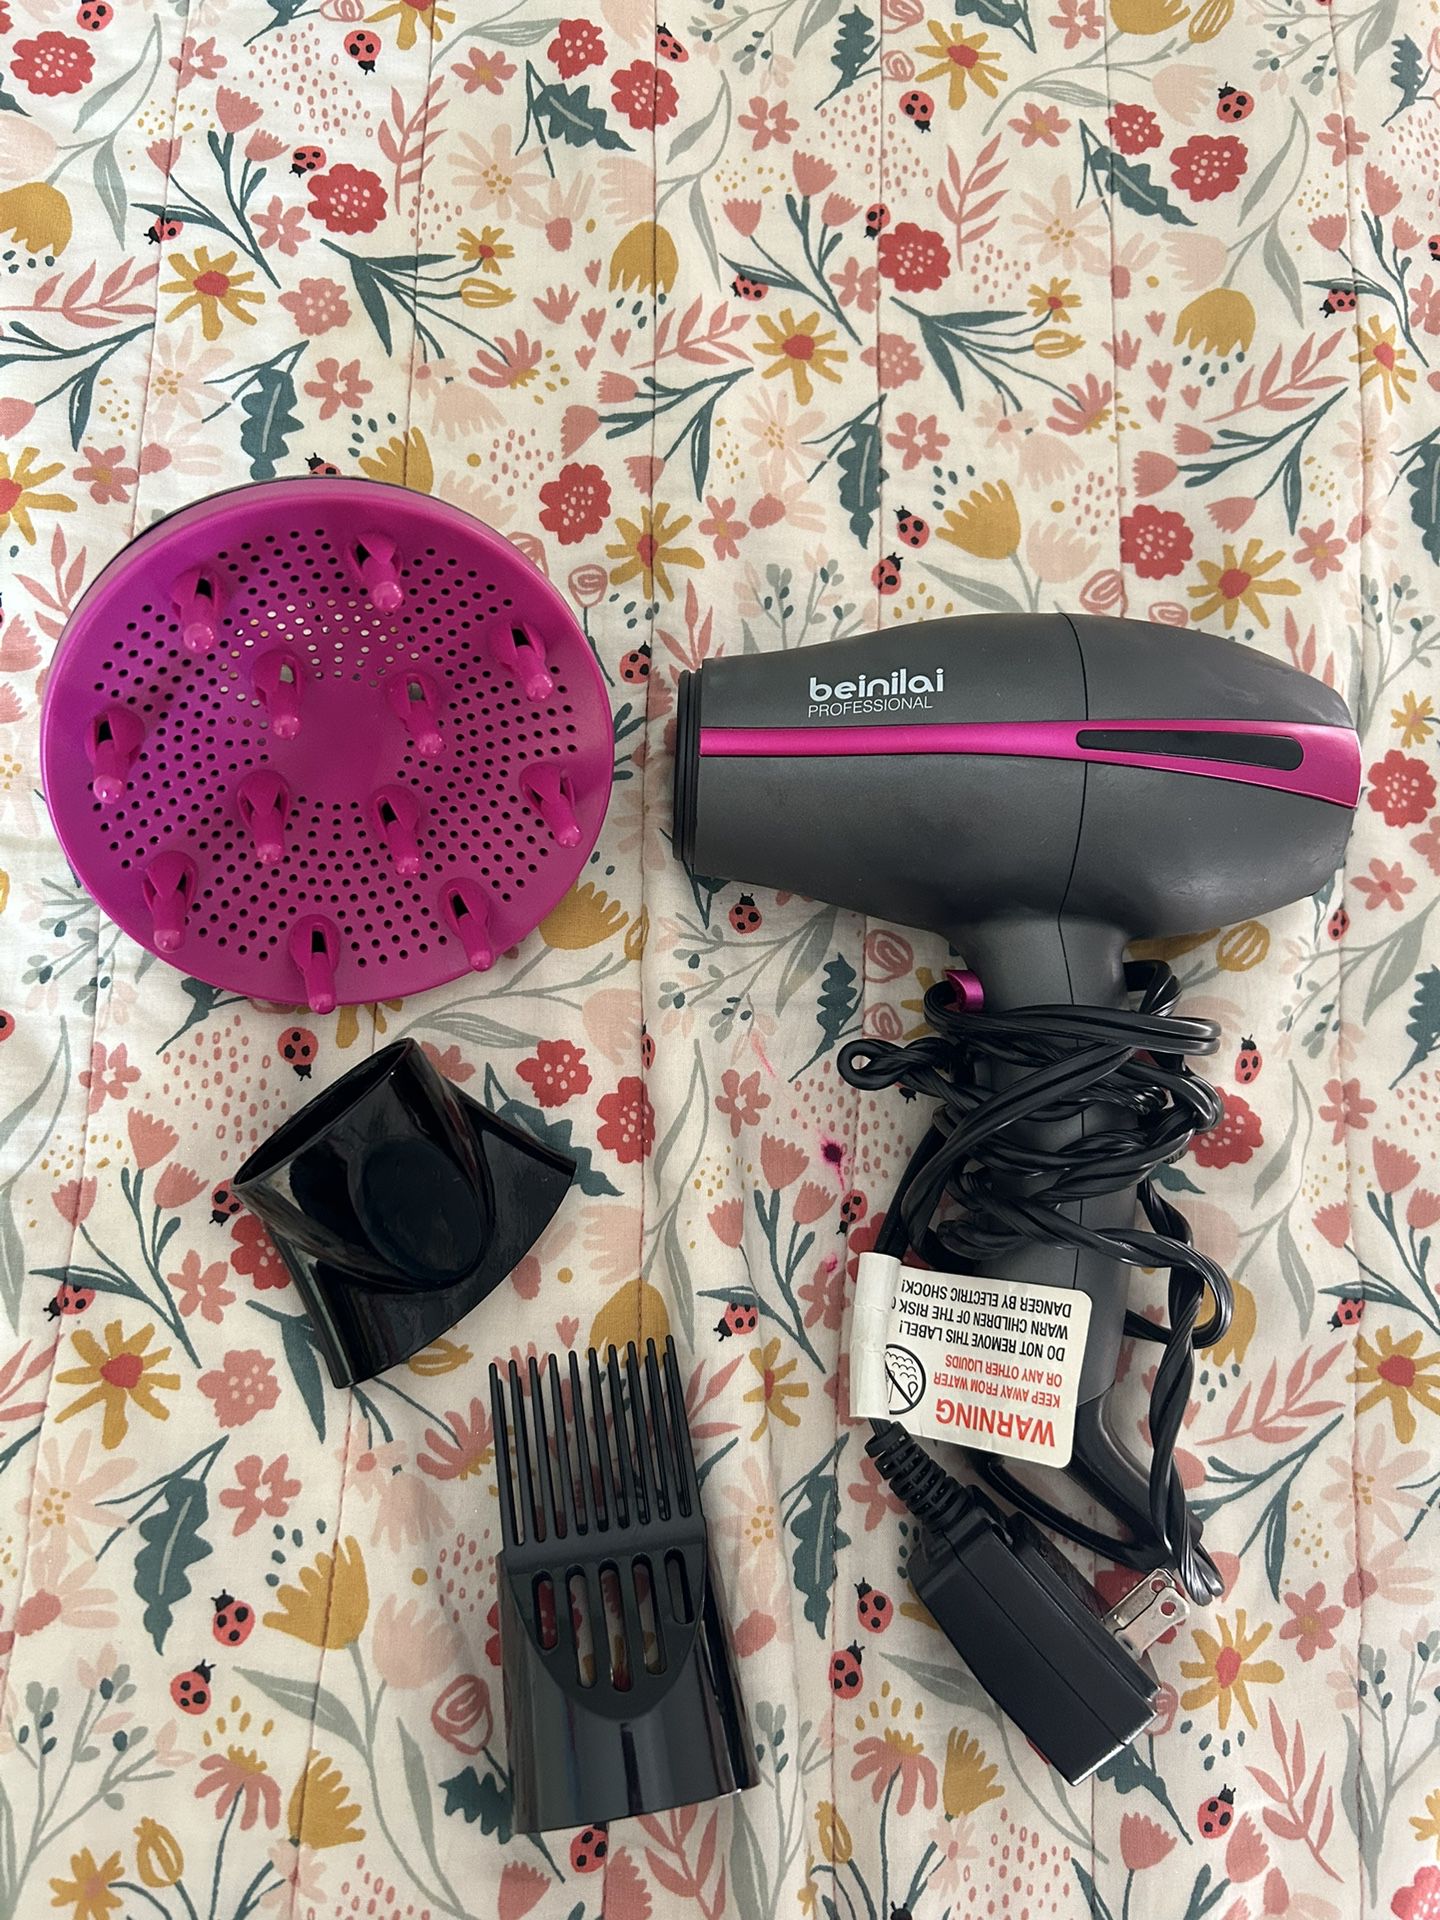 Hair Dryer for Wavy or Curly Hair